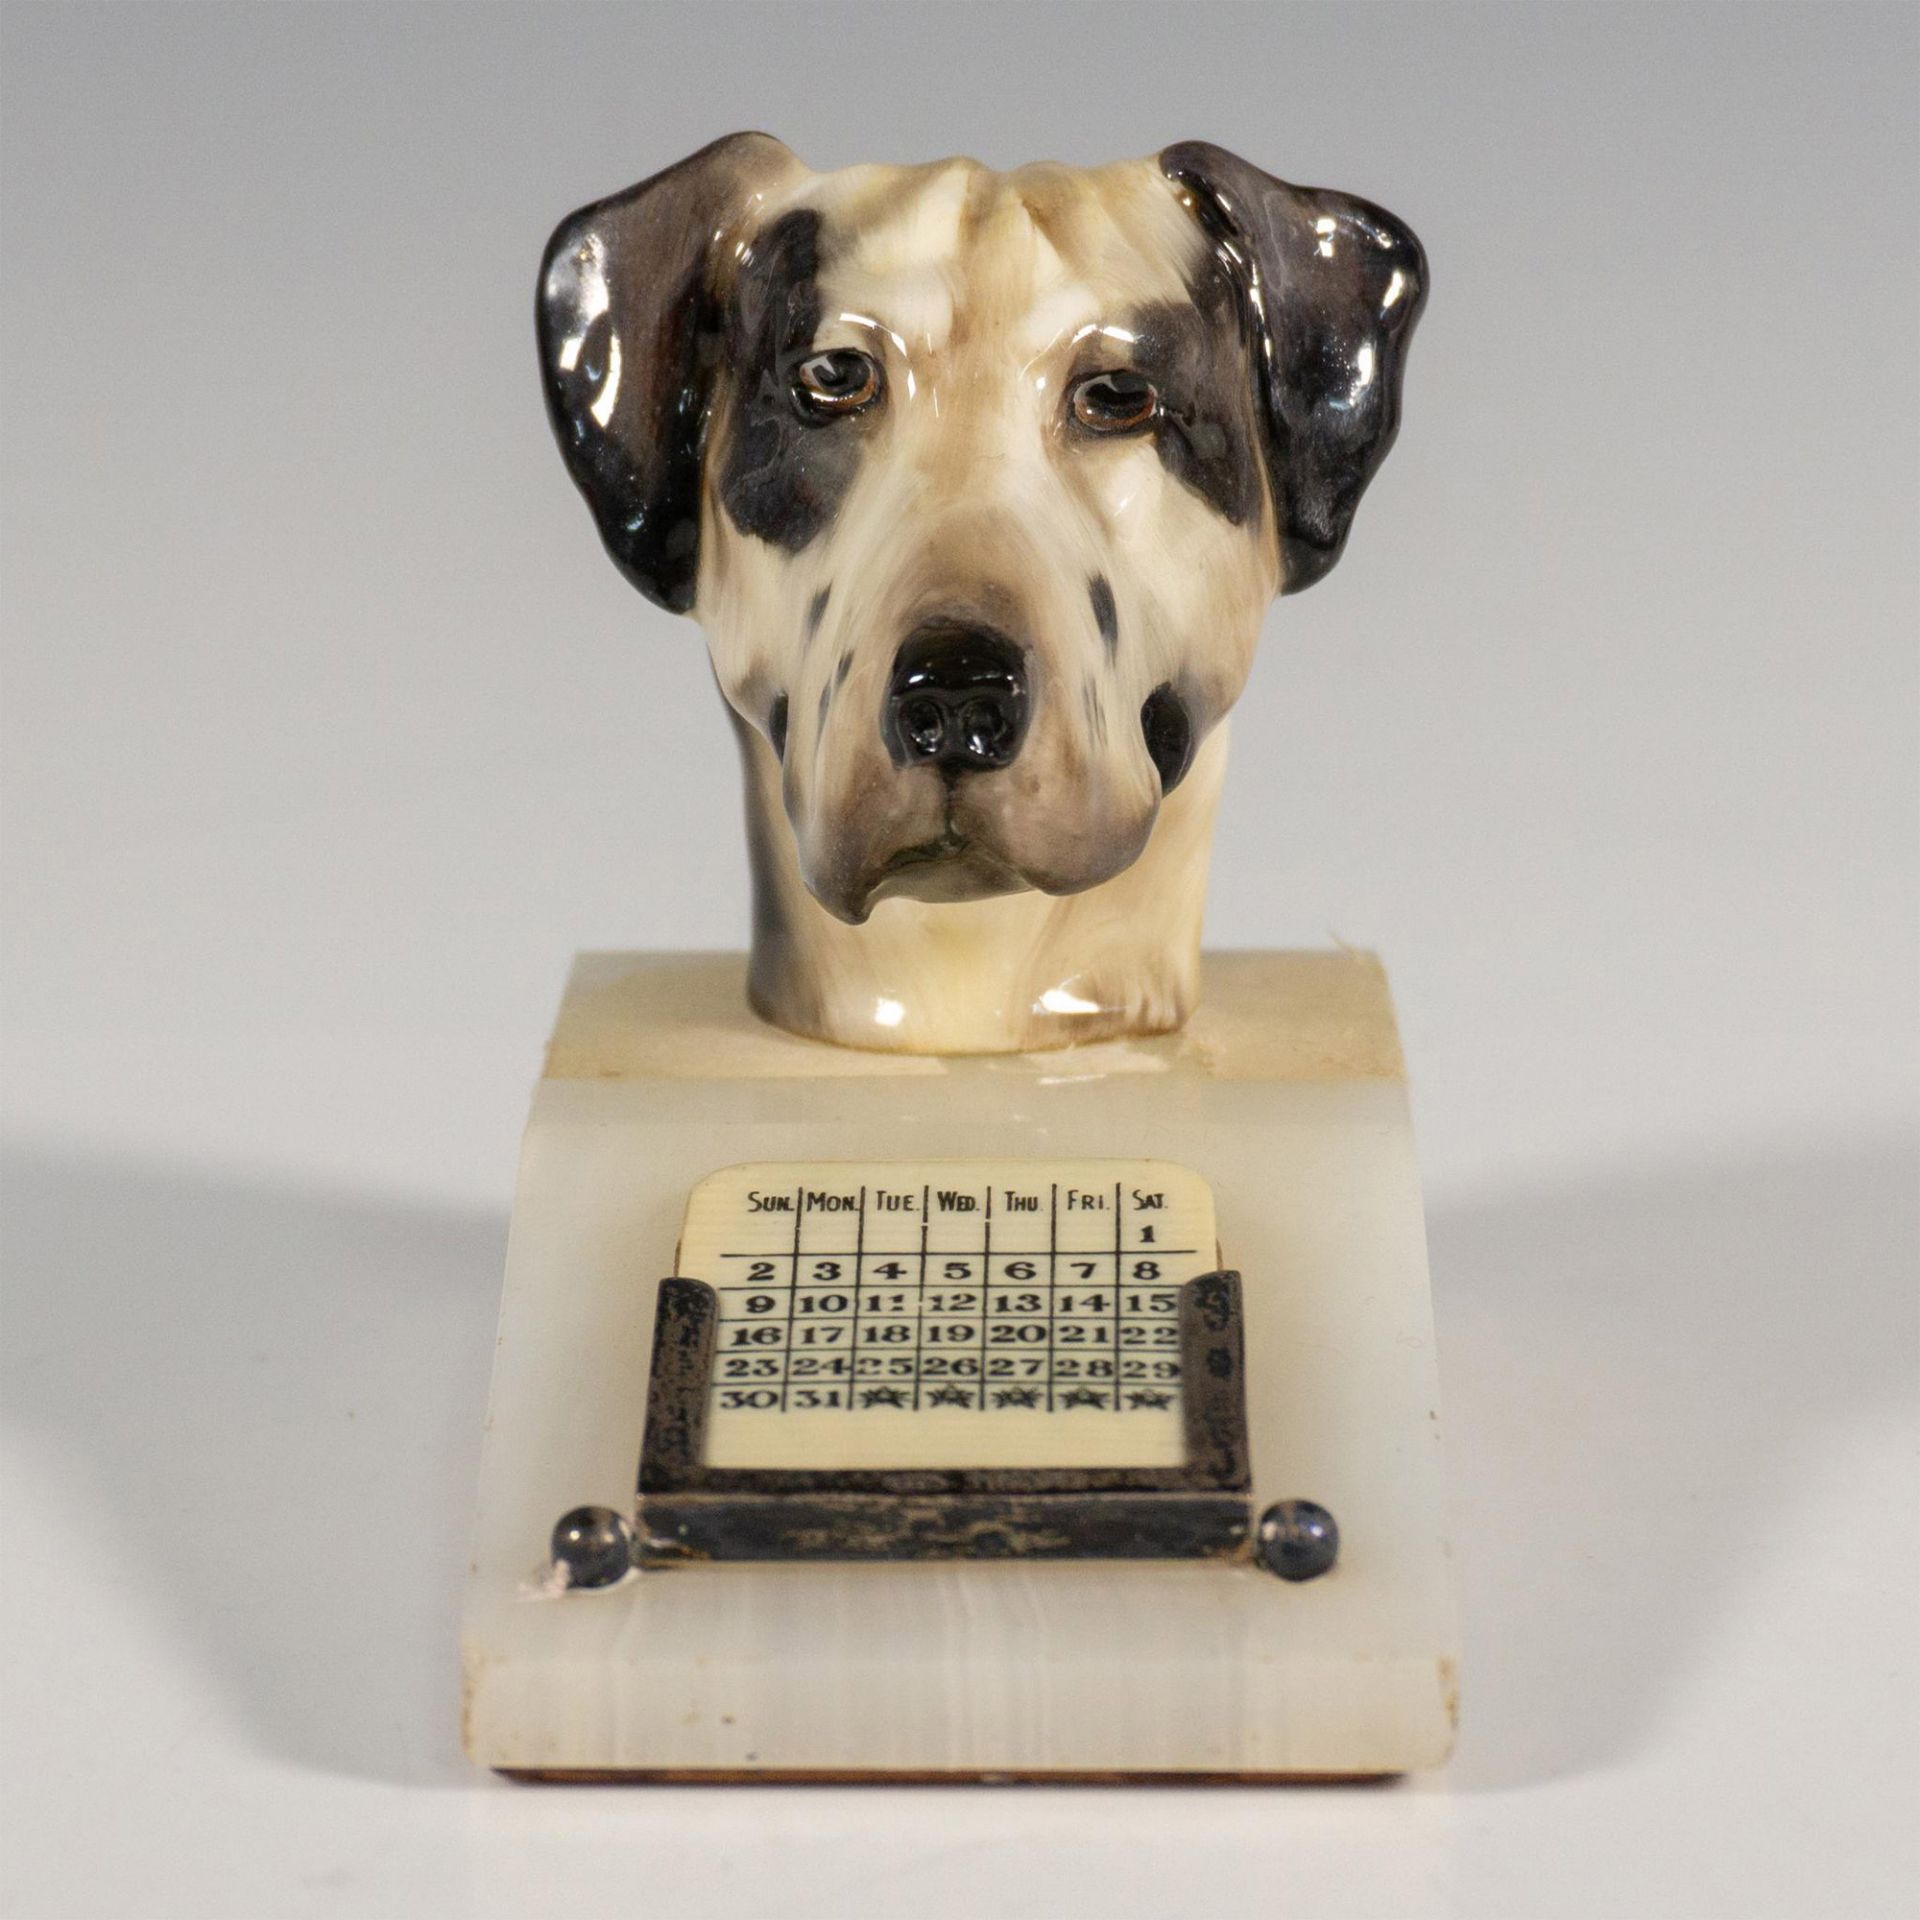 Doulton Great Dane's Head Pencil Holder Calendar on Marble - Image 2 of 6